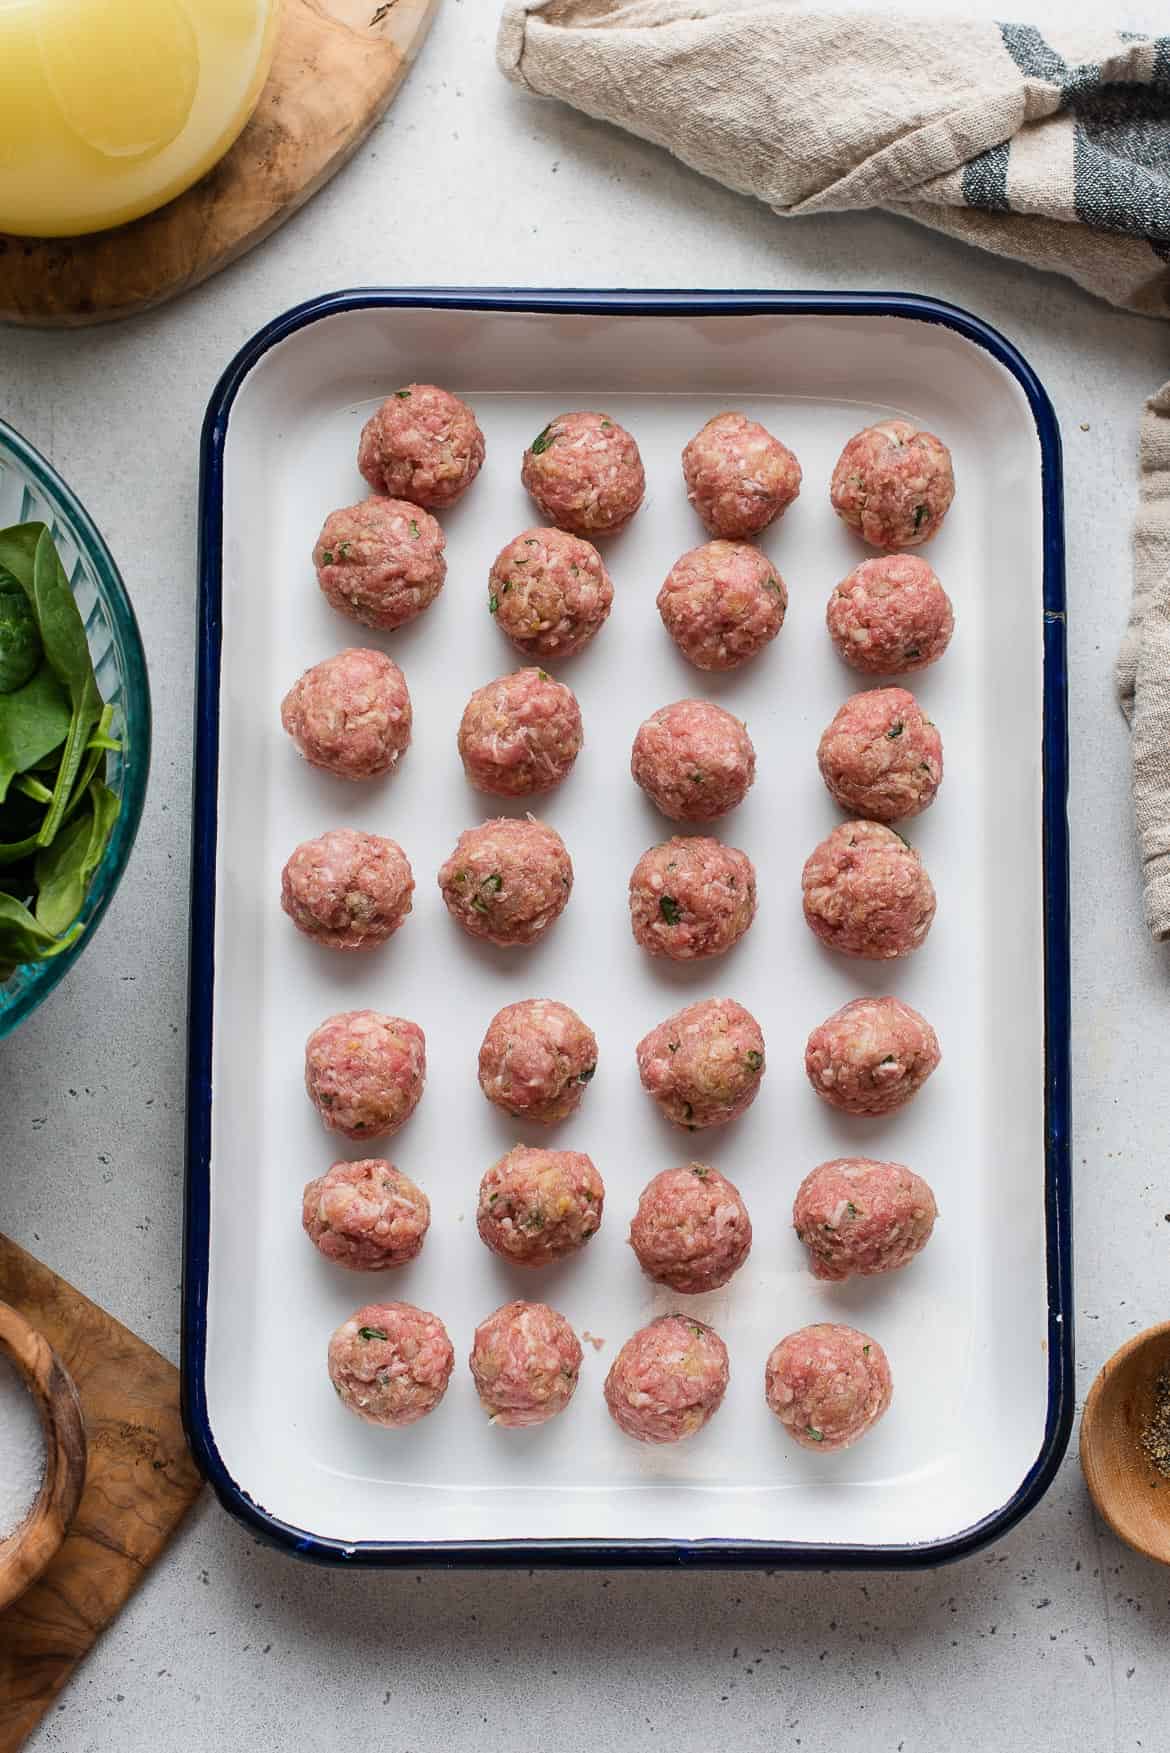 Homemade meatballs lined up on a rectangular pan, ready to cook.